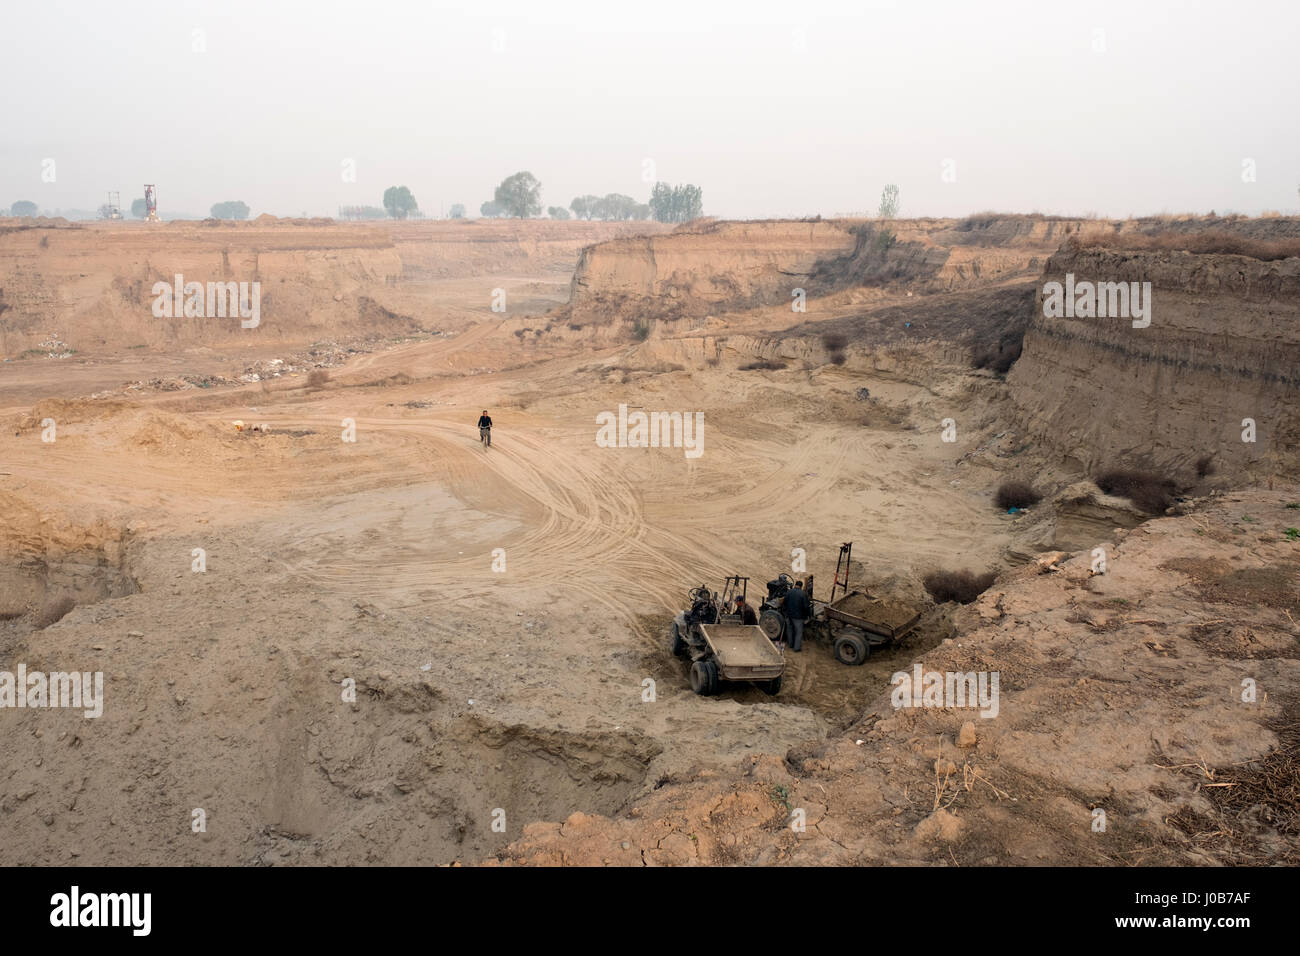 Men dredge earth or sand in a huge pit in Xiong County, Hebei province, China. 09-Apr-2017 Stock Photo